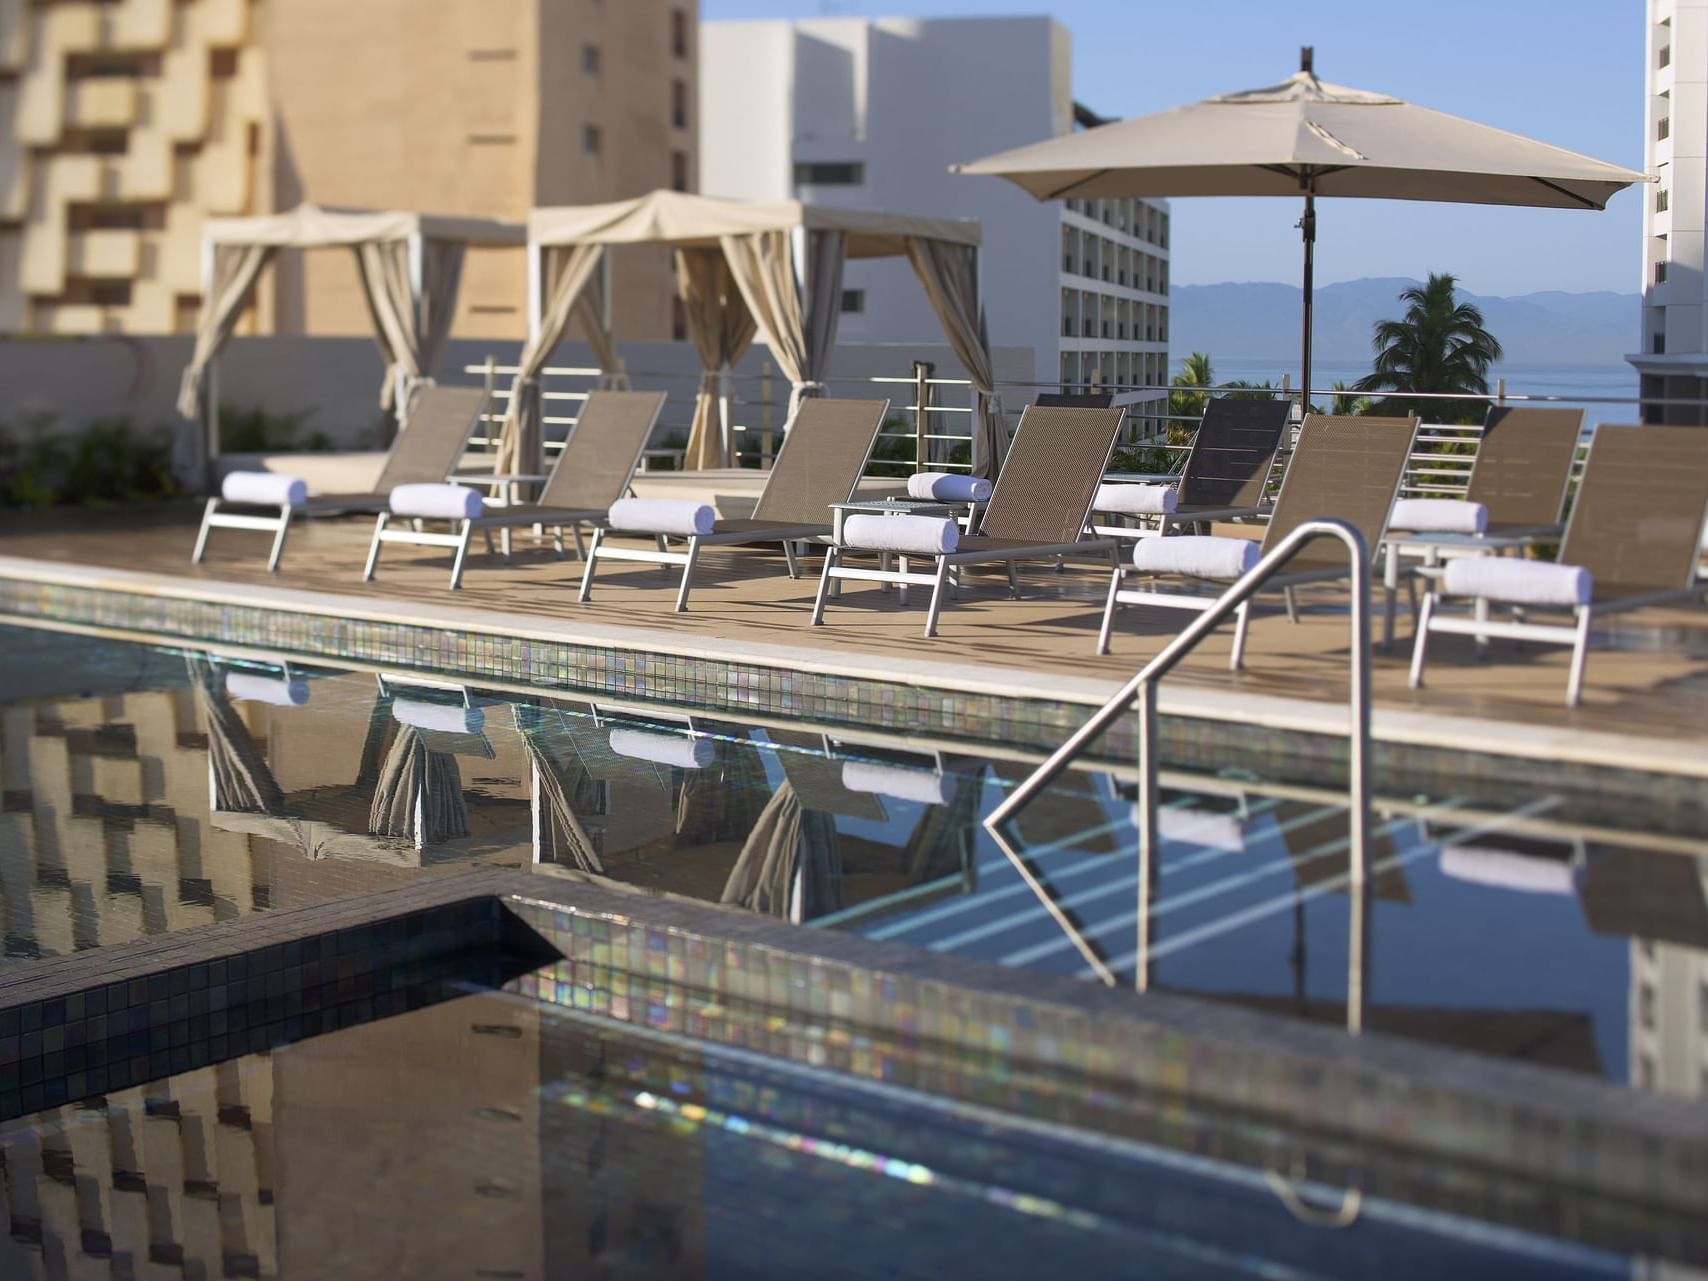 Outdoor swimming pool with loungers at Fiesta Inn Hotels